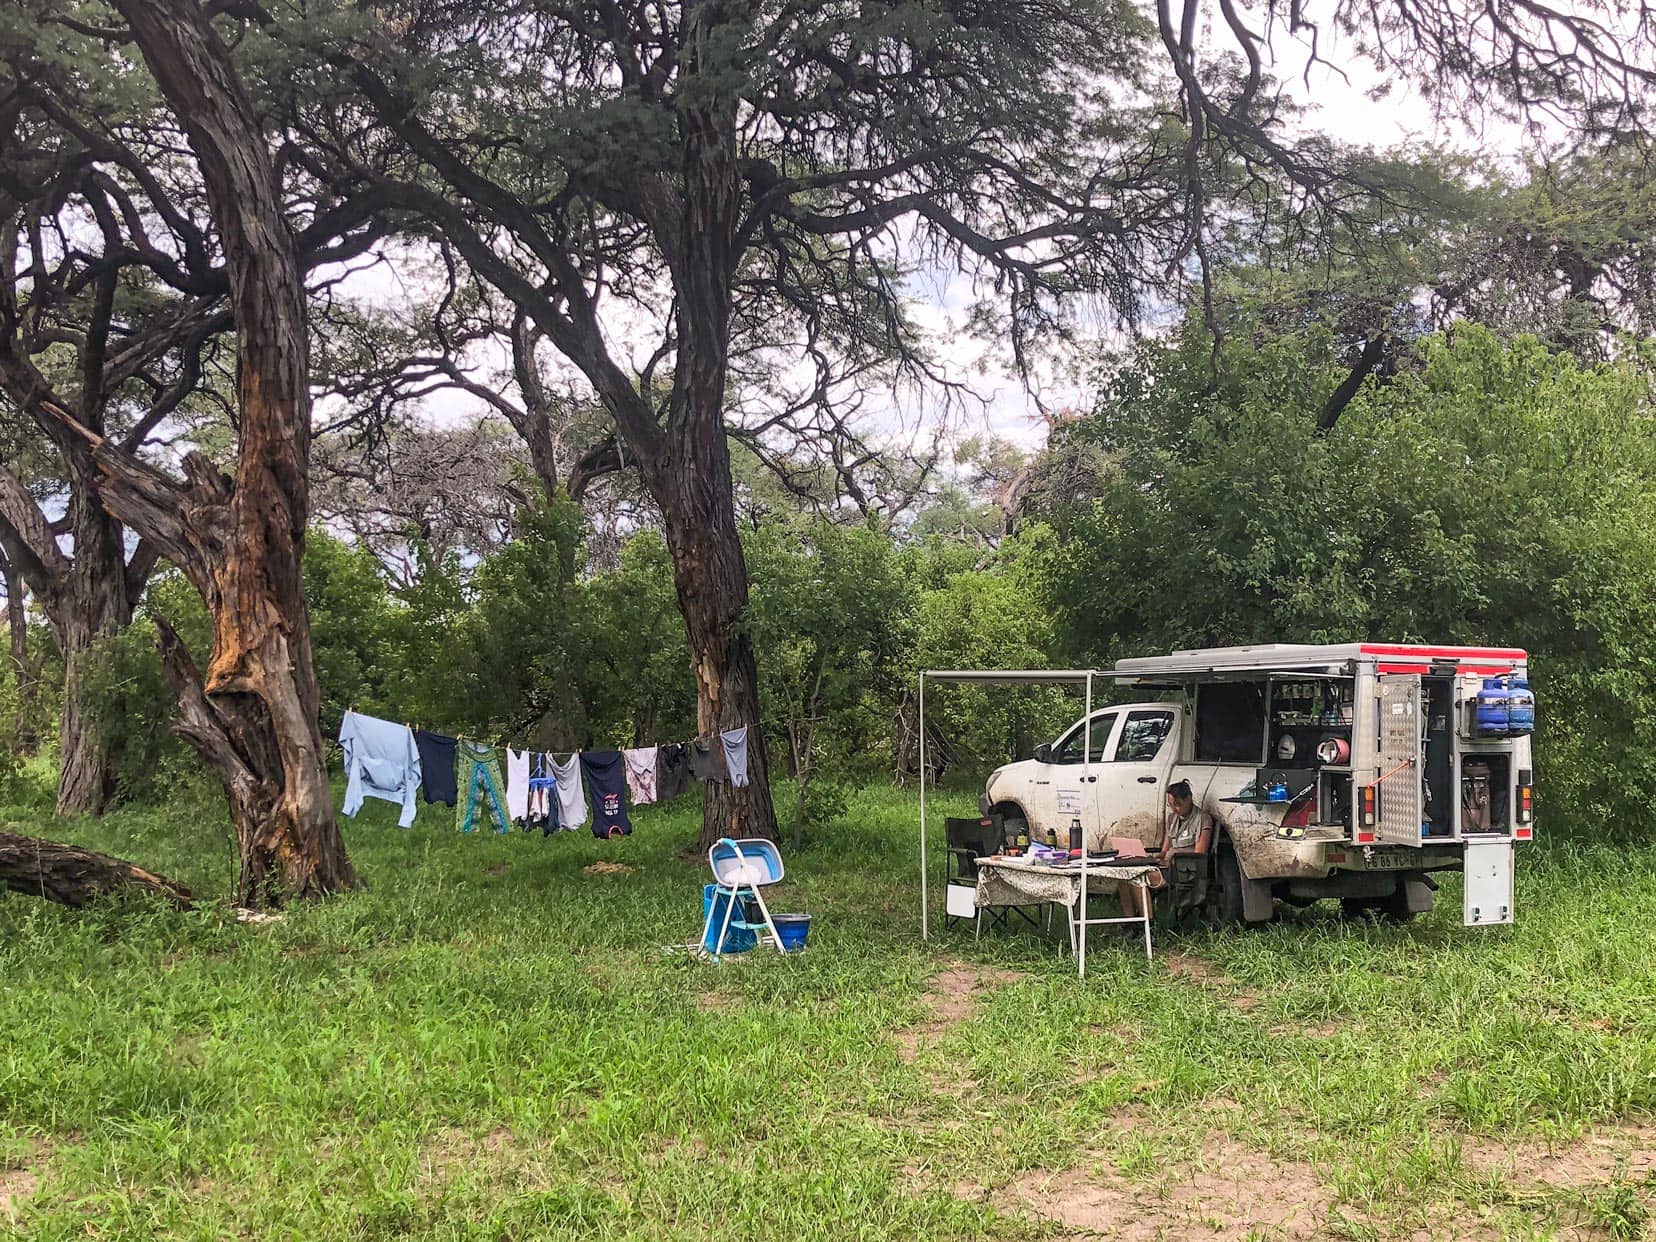 Camping-in-Khwai - 4x4 with washing hanging on rope nearby